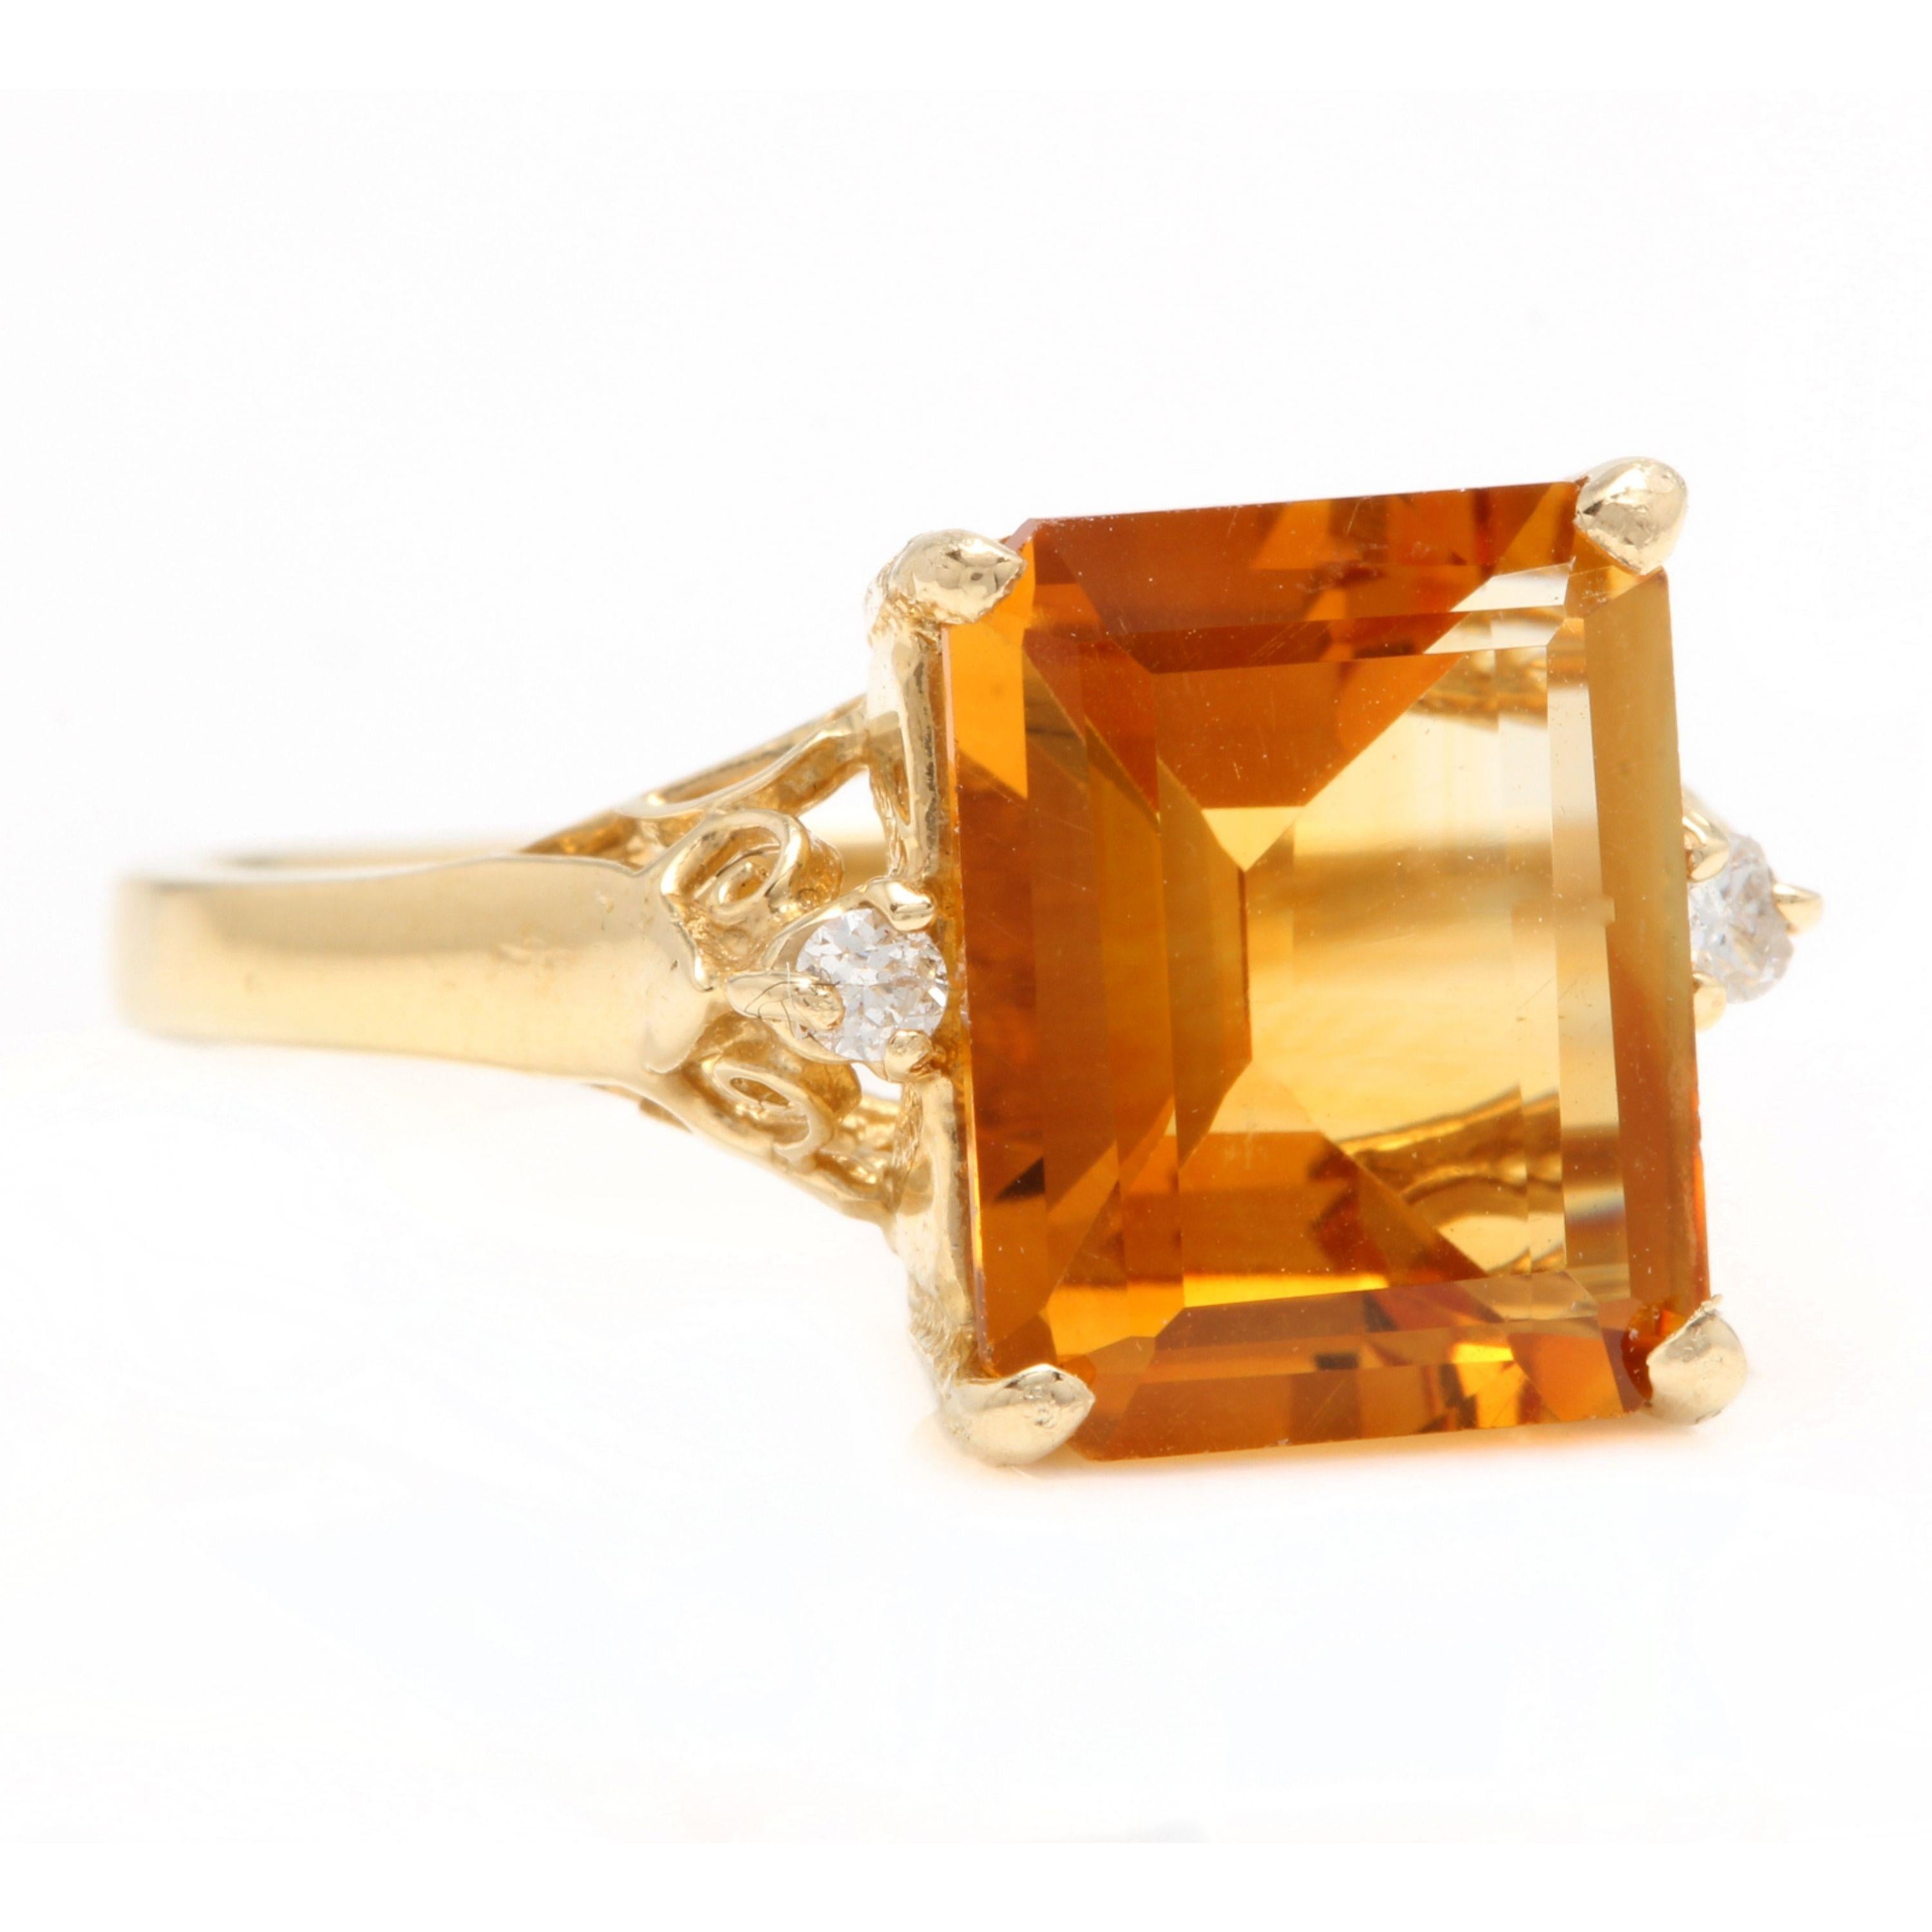 4.08 Carats Impressive Natural Citrine and Diamond 14K Yellow Gold Ring

Total Natural Citrine Weight is: Approx. 4.00 Carats

Citrine Measures: Approx. 10.00 x 8.00mm

Natural Round Diamonds Weight: Approx. 0.08 Carats (color G-H / Clarity